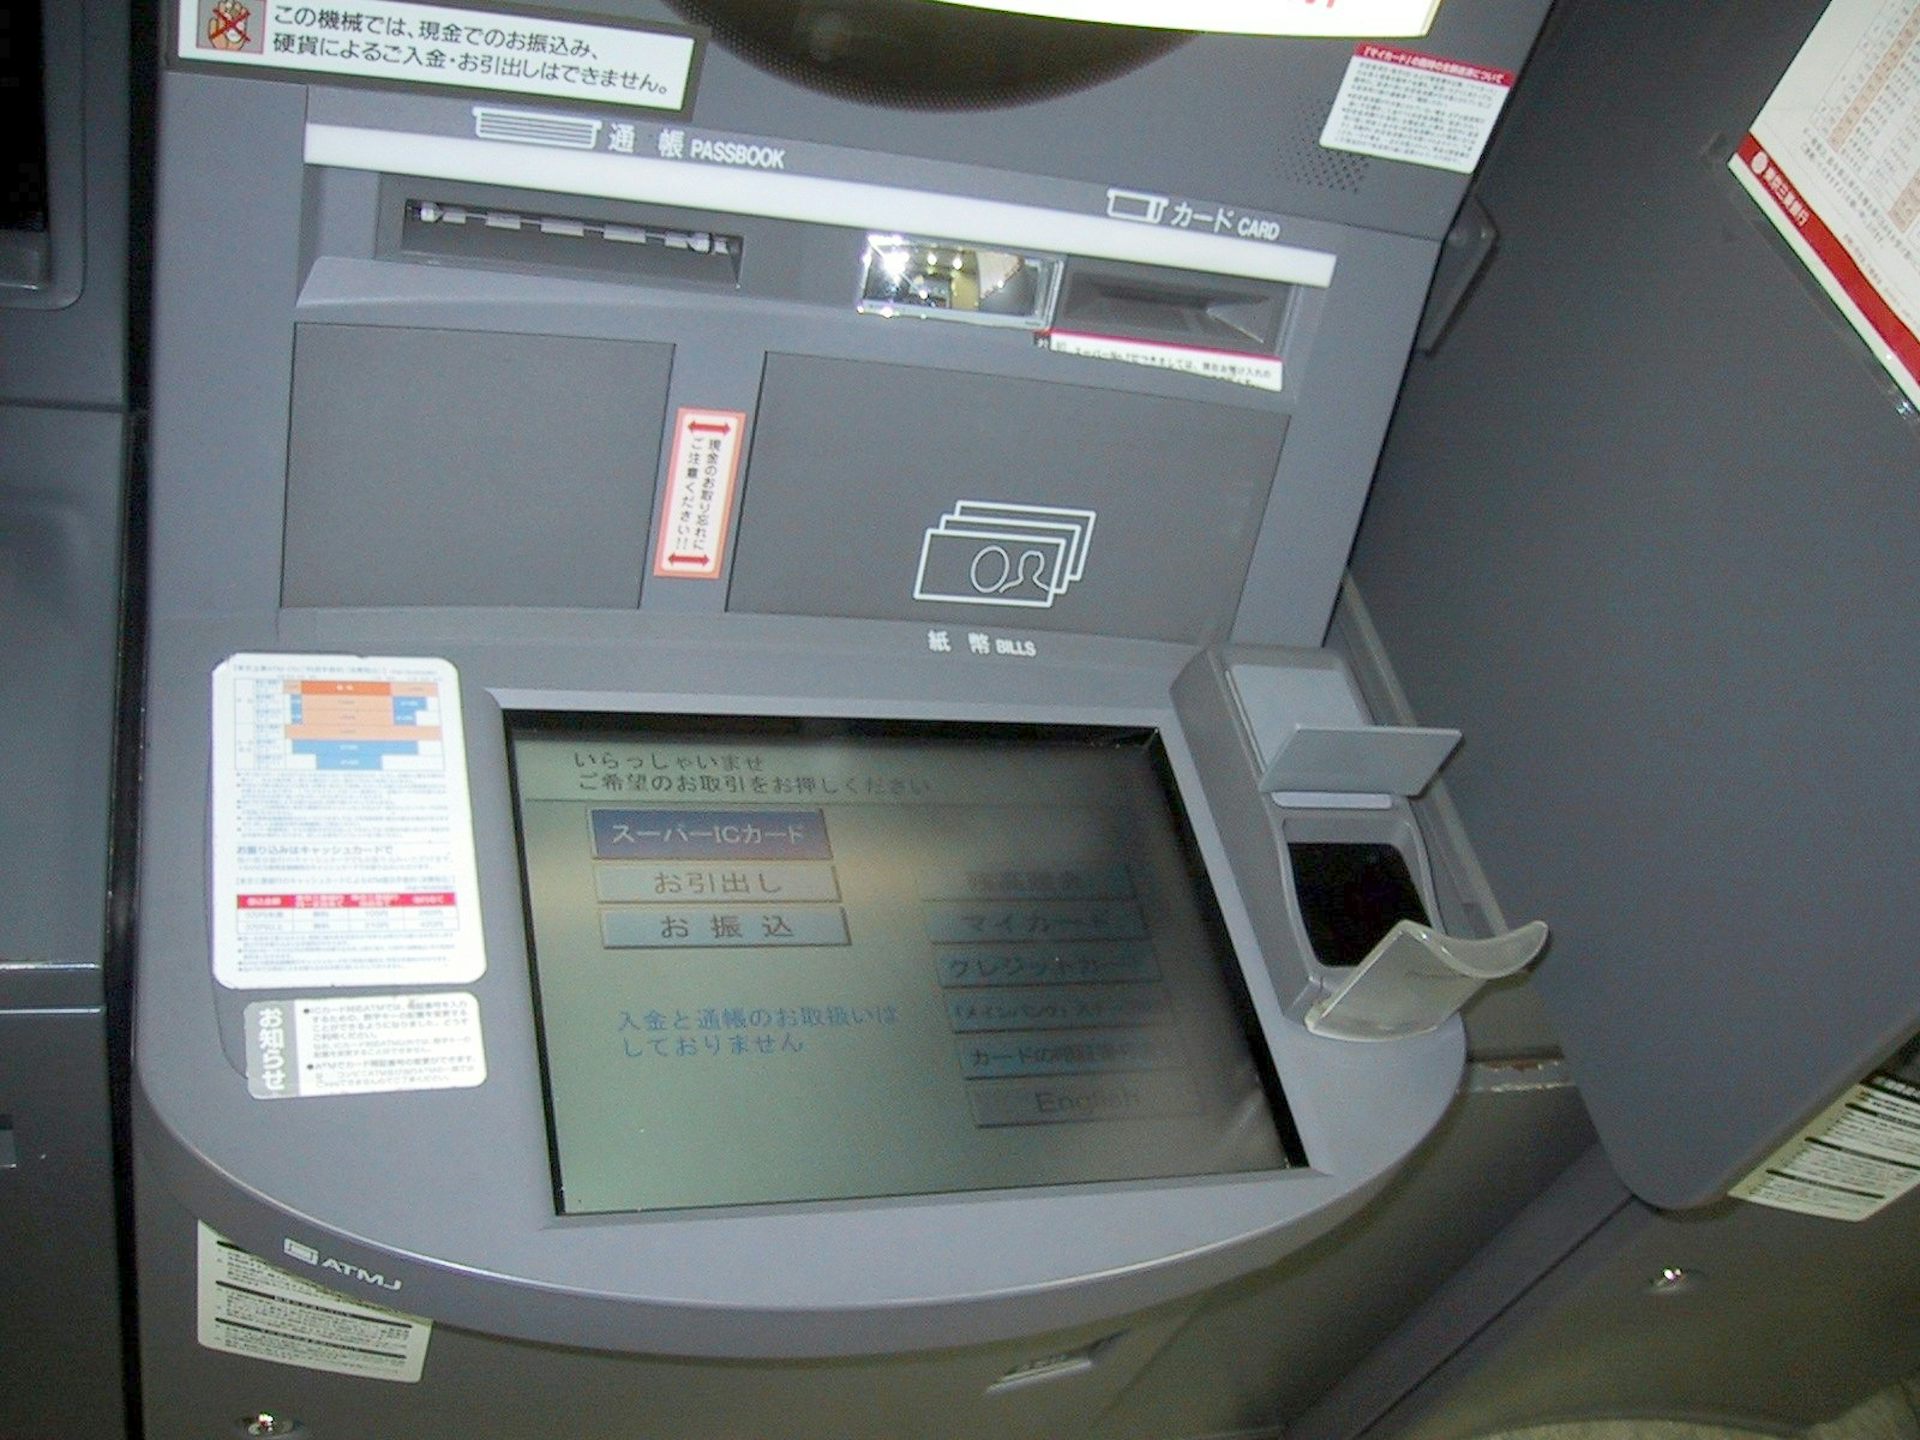 1. "ATM Hack Codes for Free Money" - wide 4